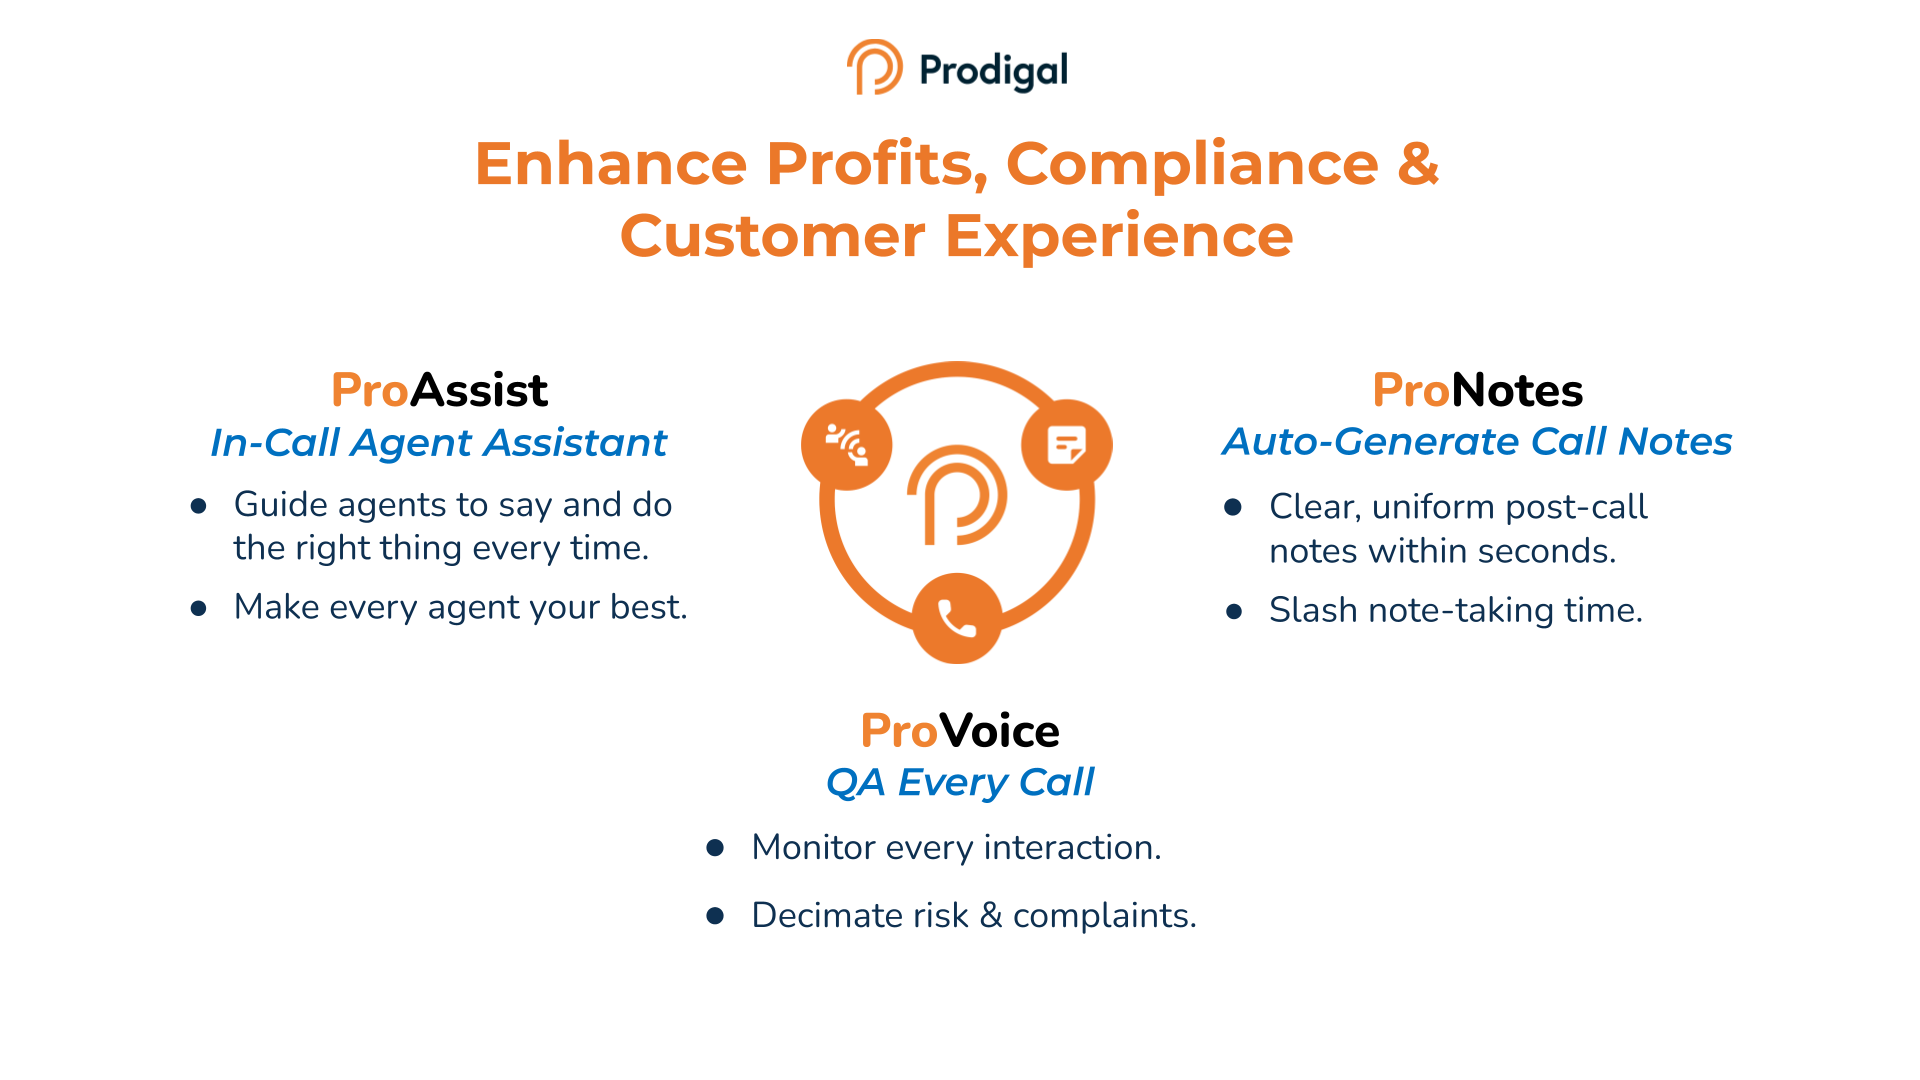 Prodigal is a cloud-based Consumer Finance Intelligence solution made up of three core apps: ProAssist, ProNotes, and ProVoice.